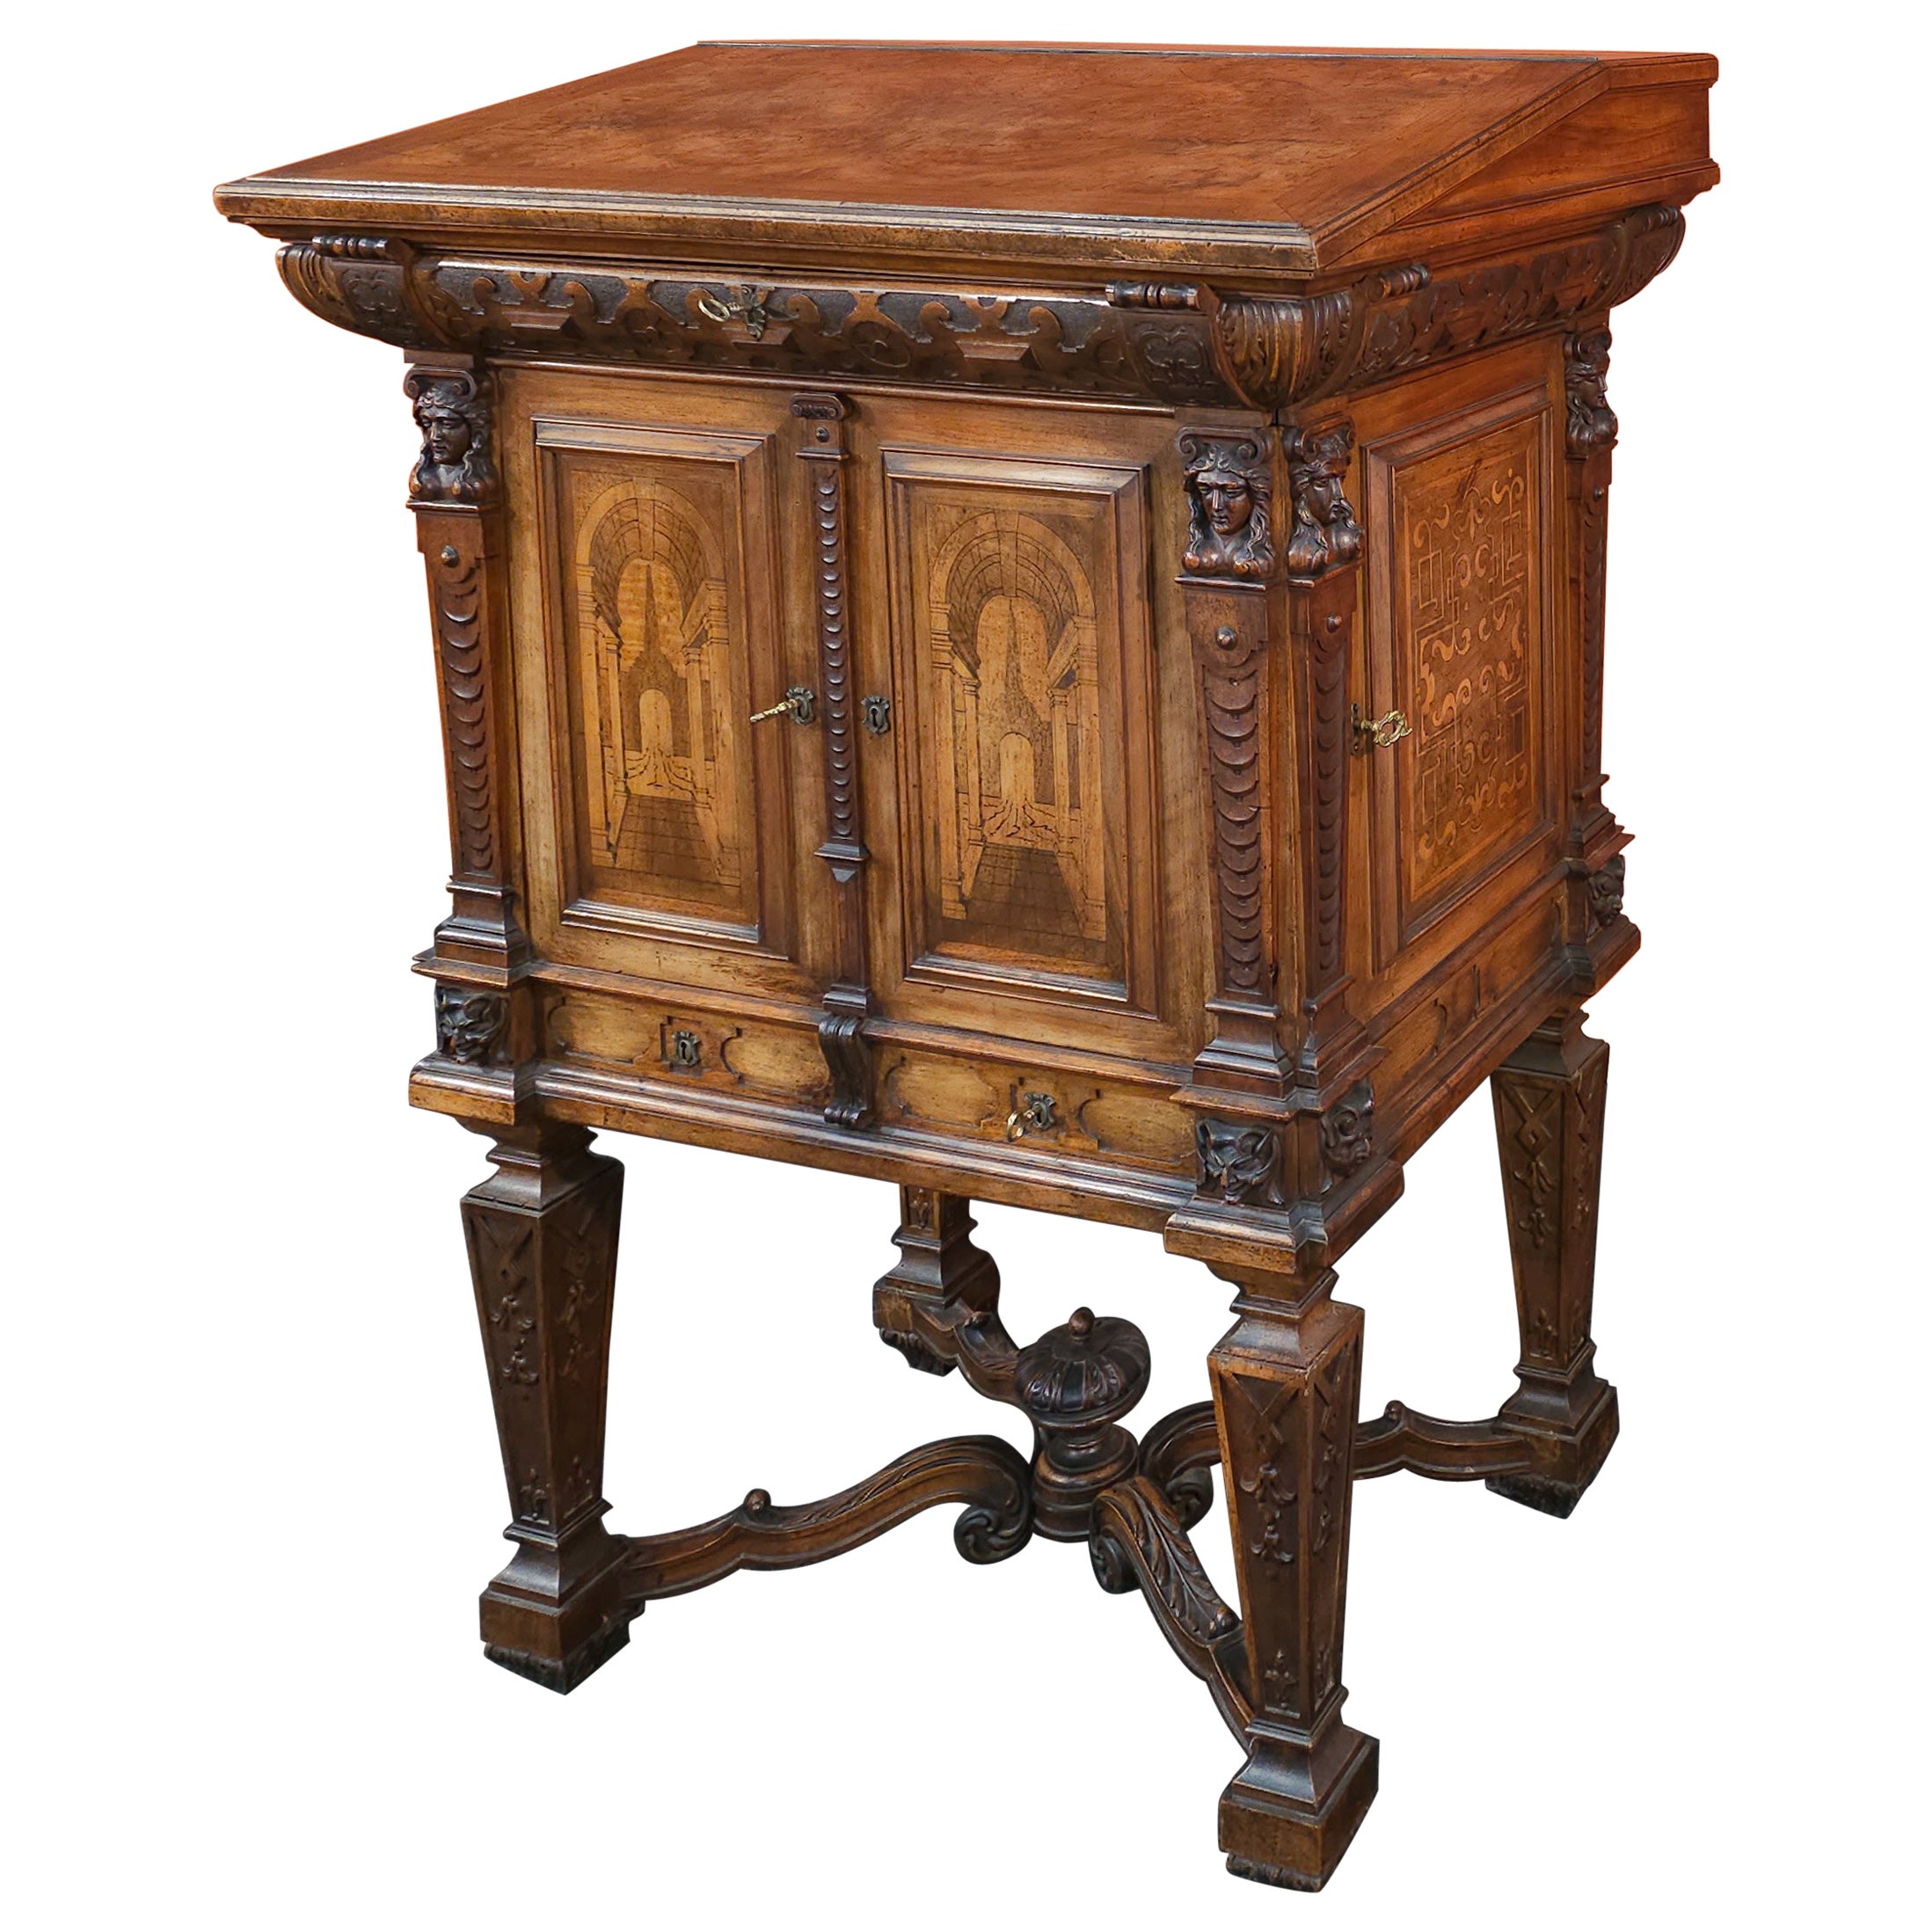 German Lectern Podium with Inlays, 1850 circa For Sale